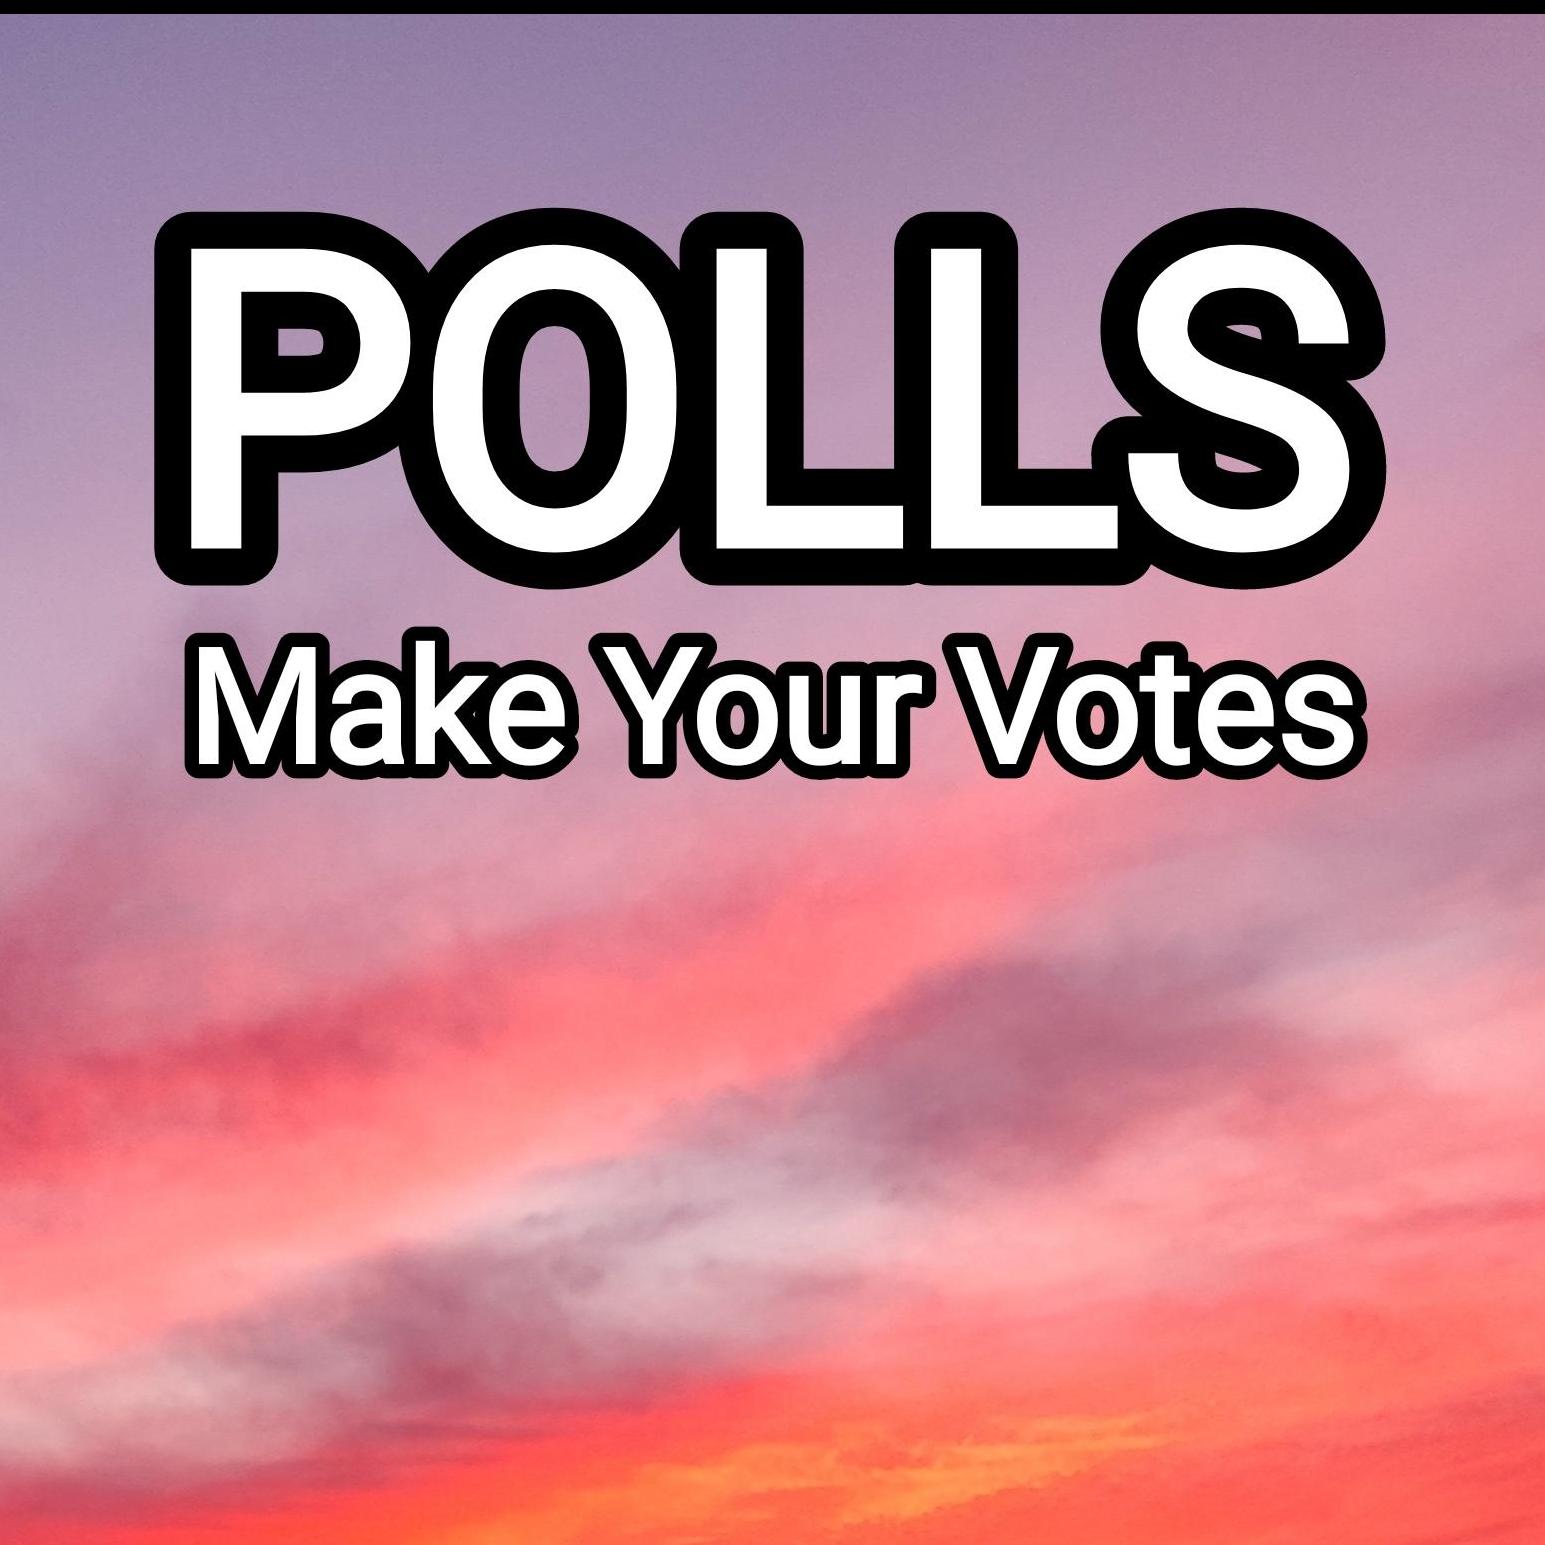 "Polls" of all types